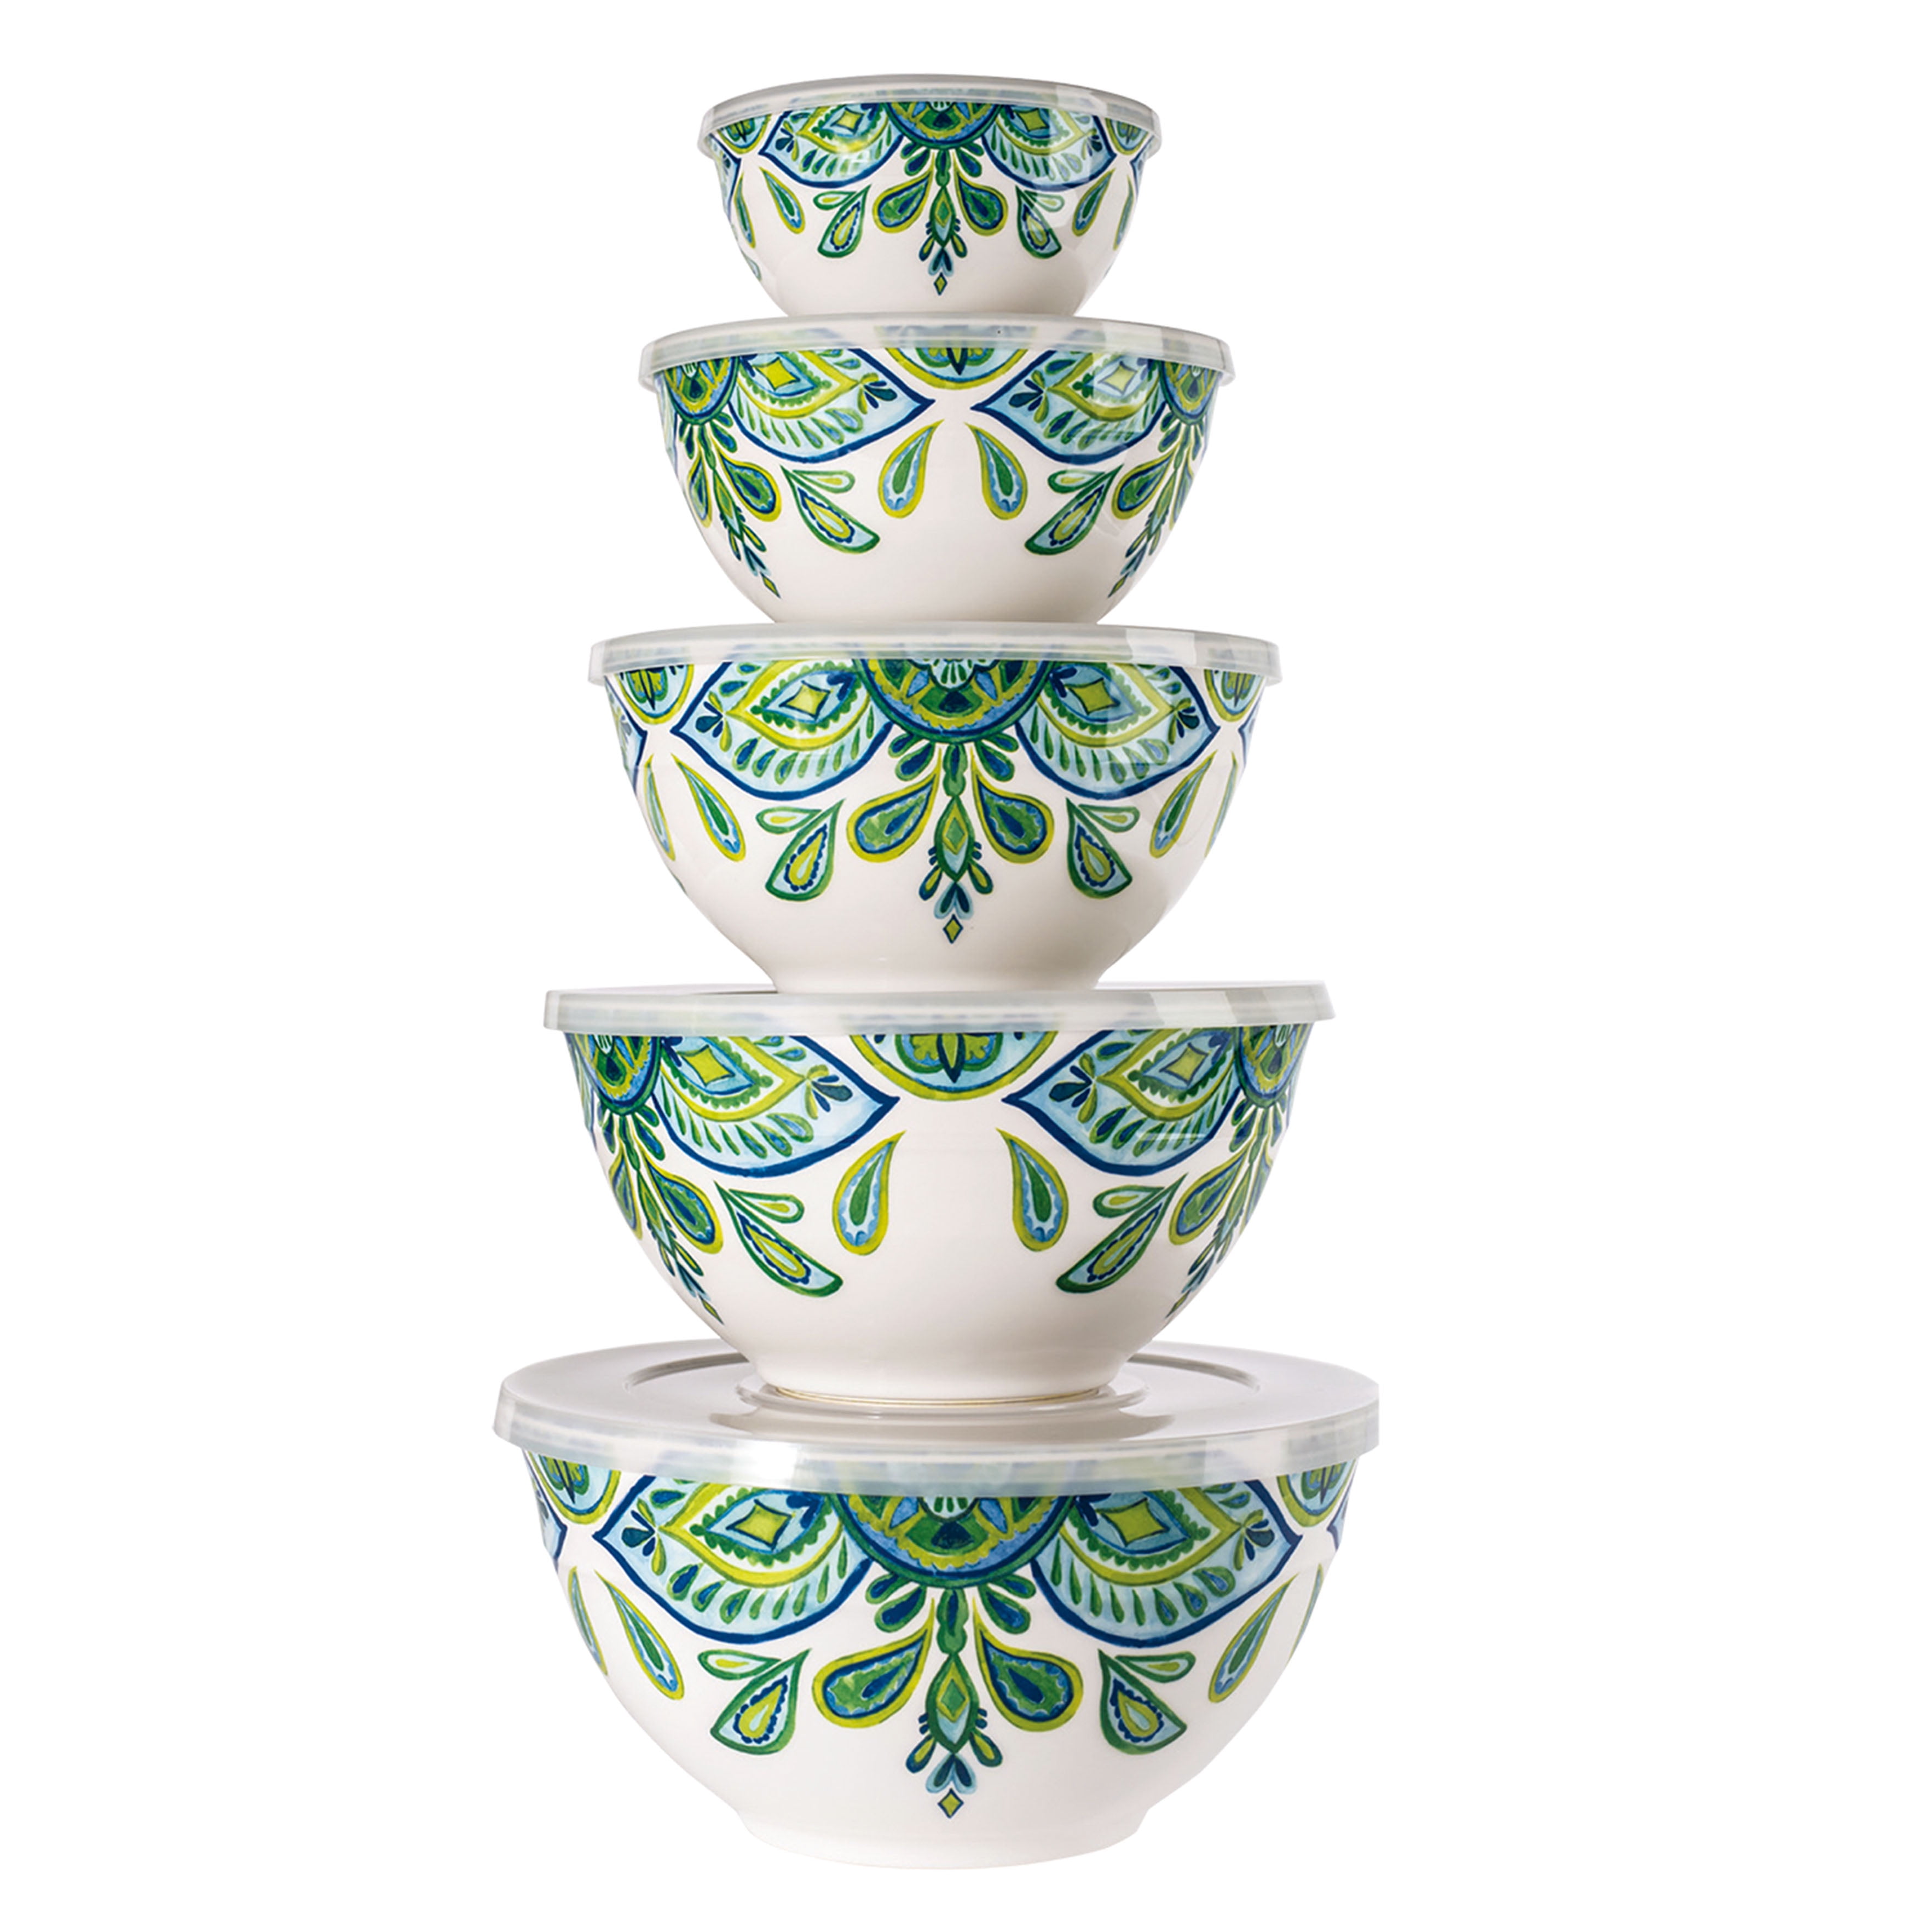 10 Piece Melamine Mixing Bowl Set BlueFrench Country Premium edition 